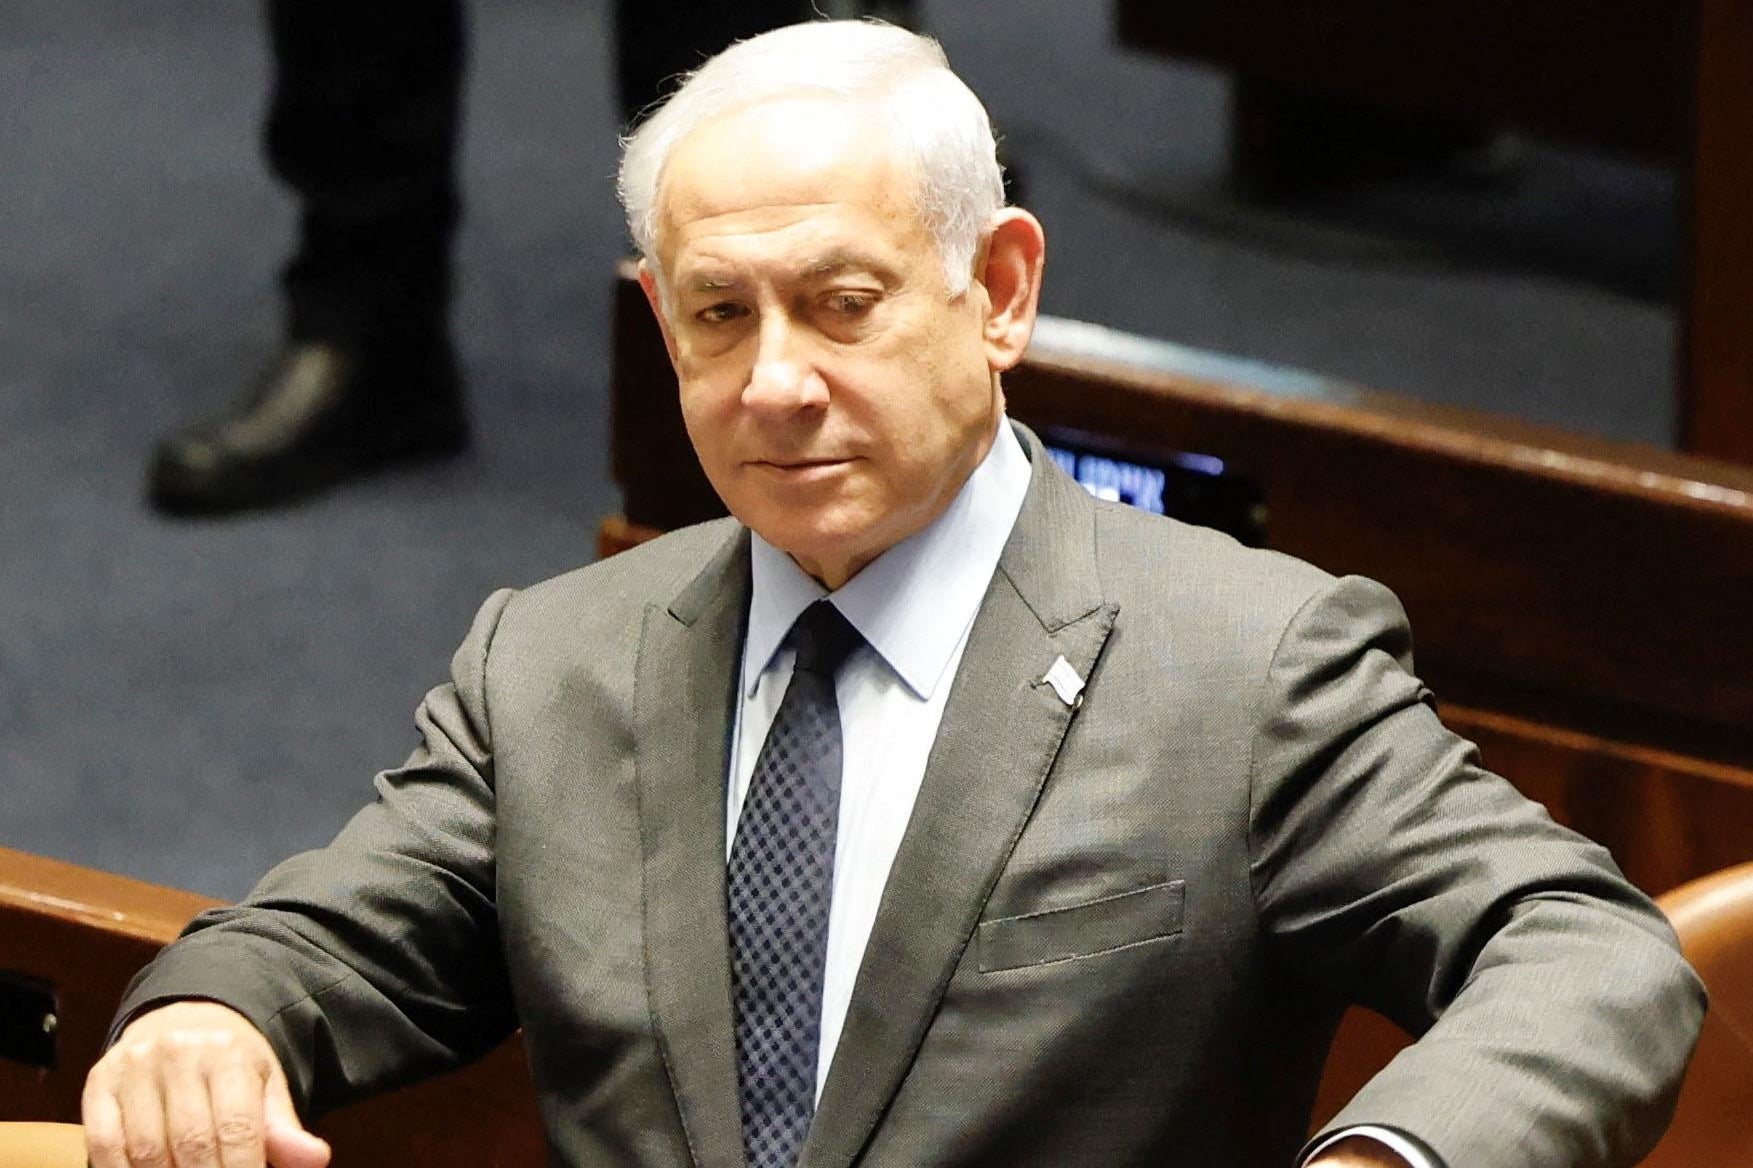 Netanyahu looks down and to the left.